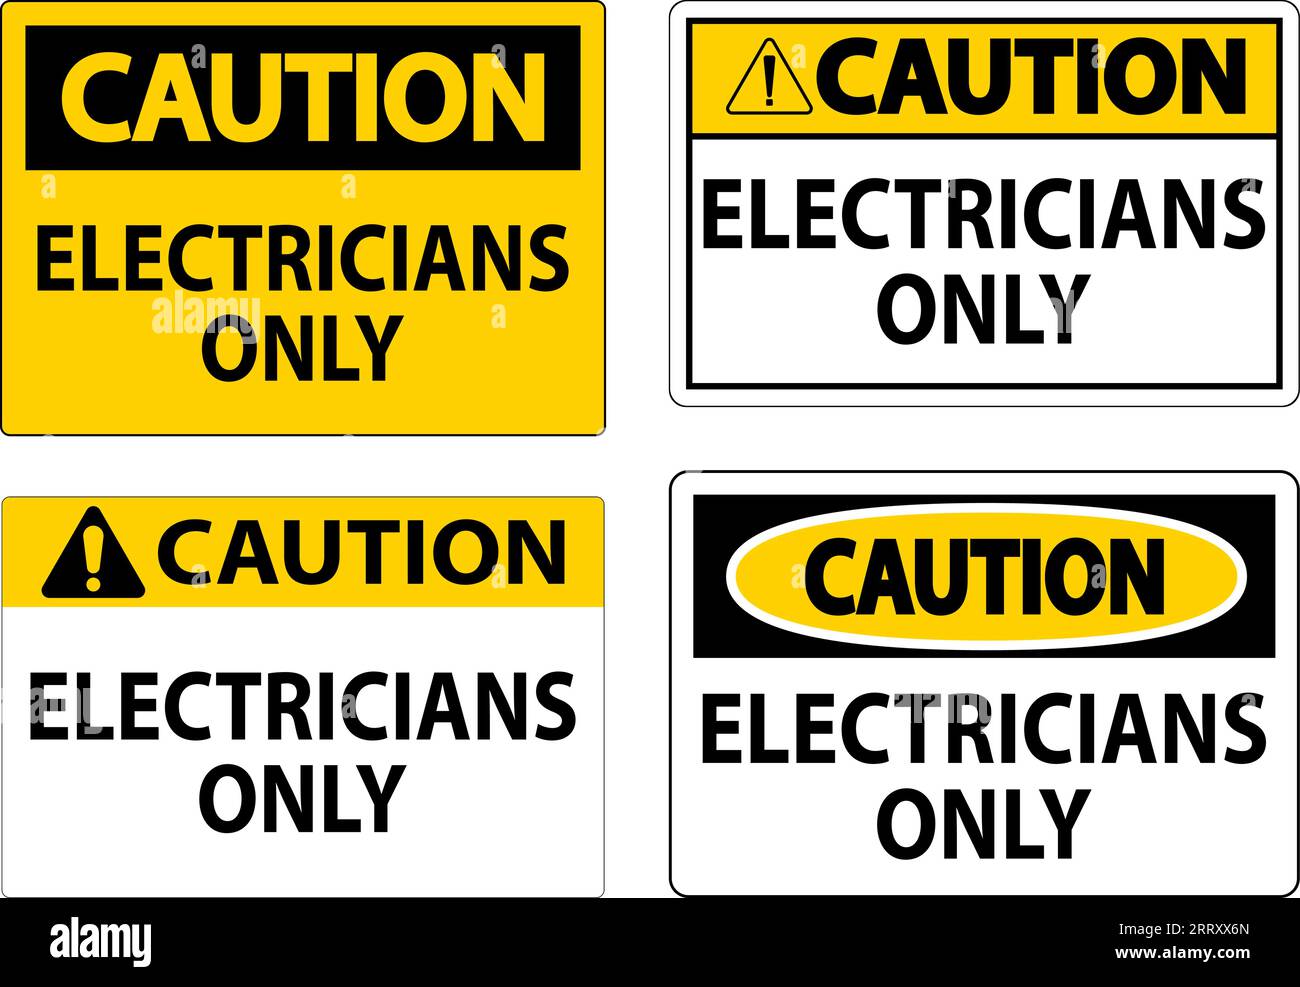 Caution Sign Electricians Only Stock Vector